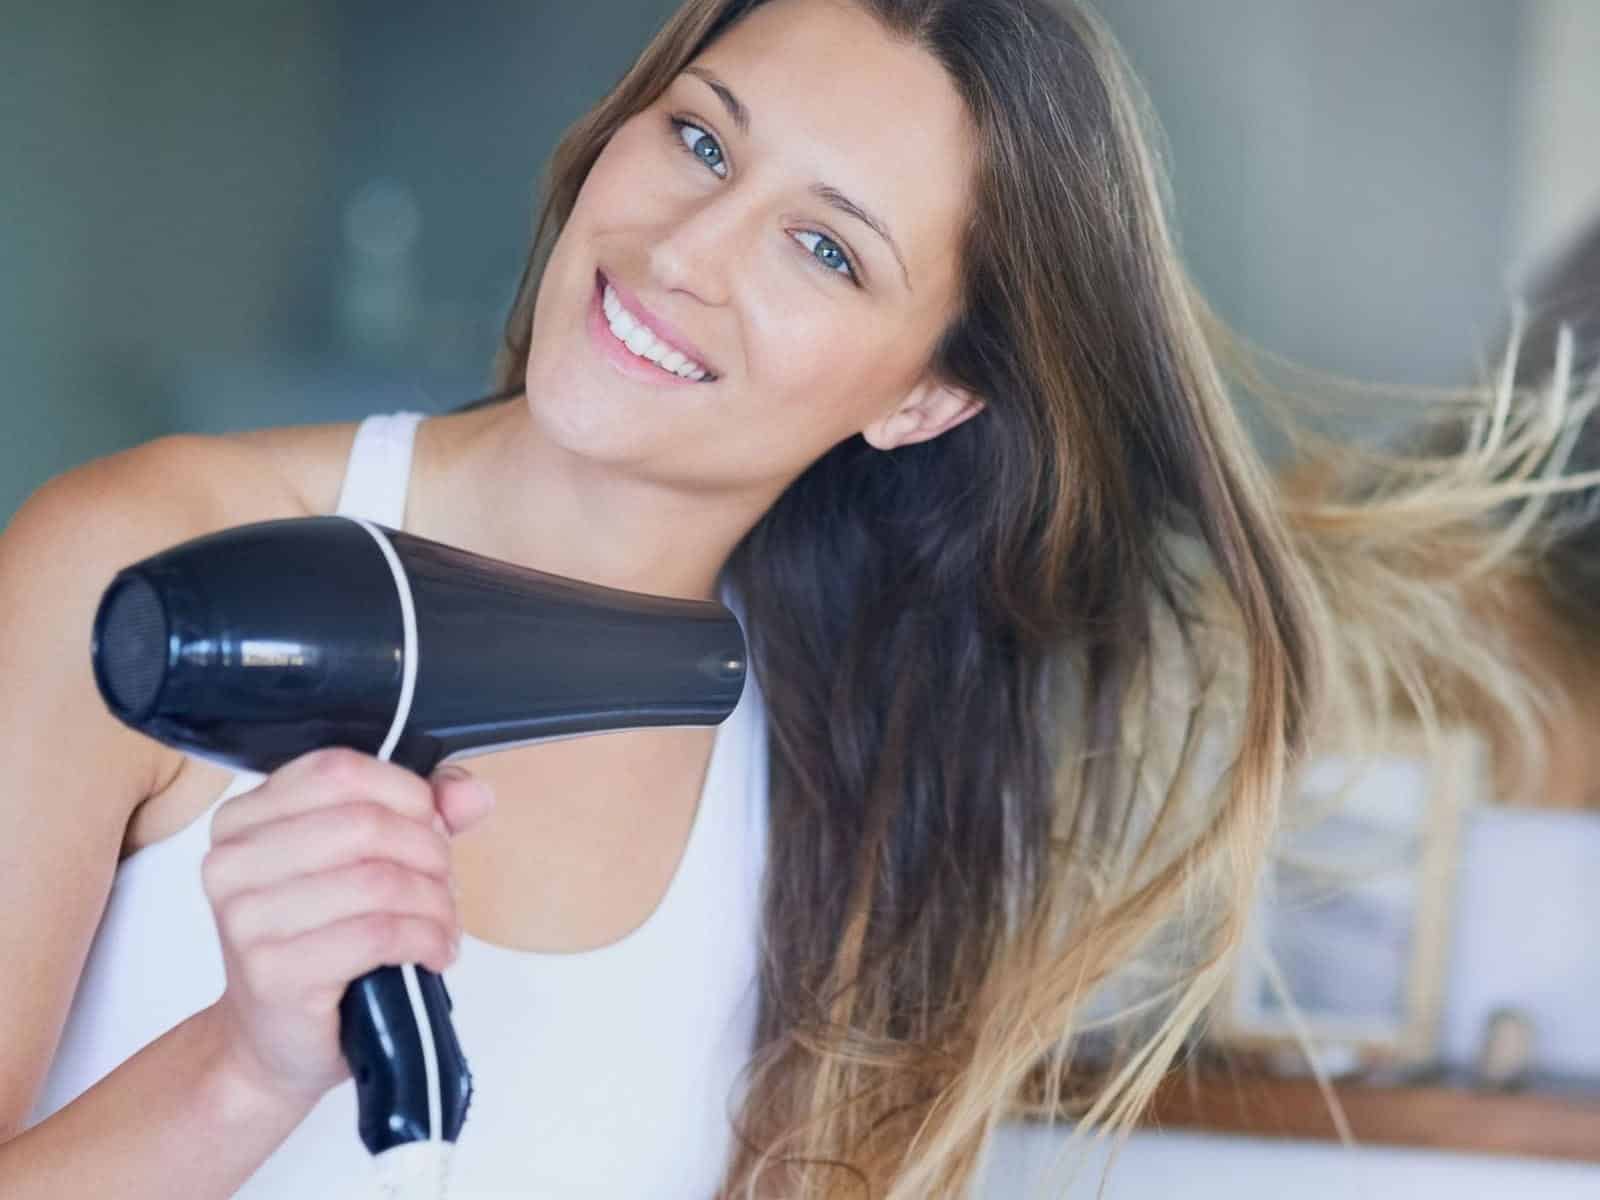 KERATIN: WHAT DOES THE HAIR PROTEIN DO?